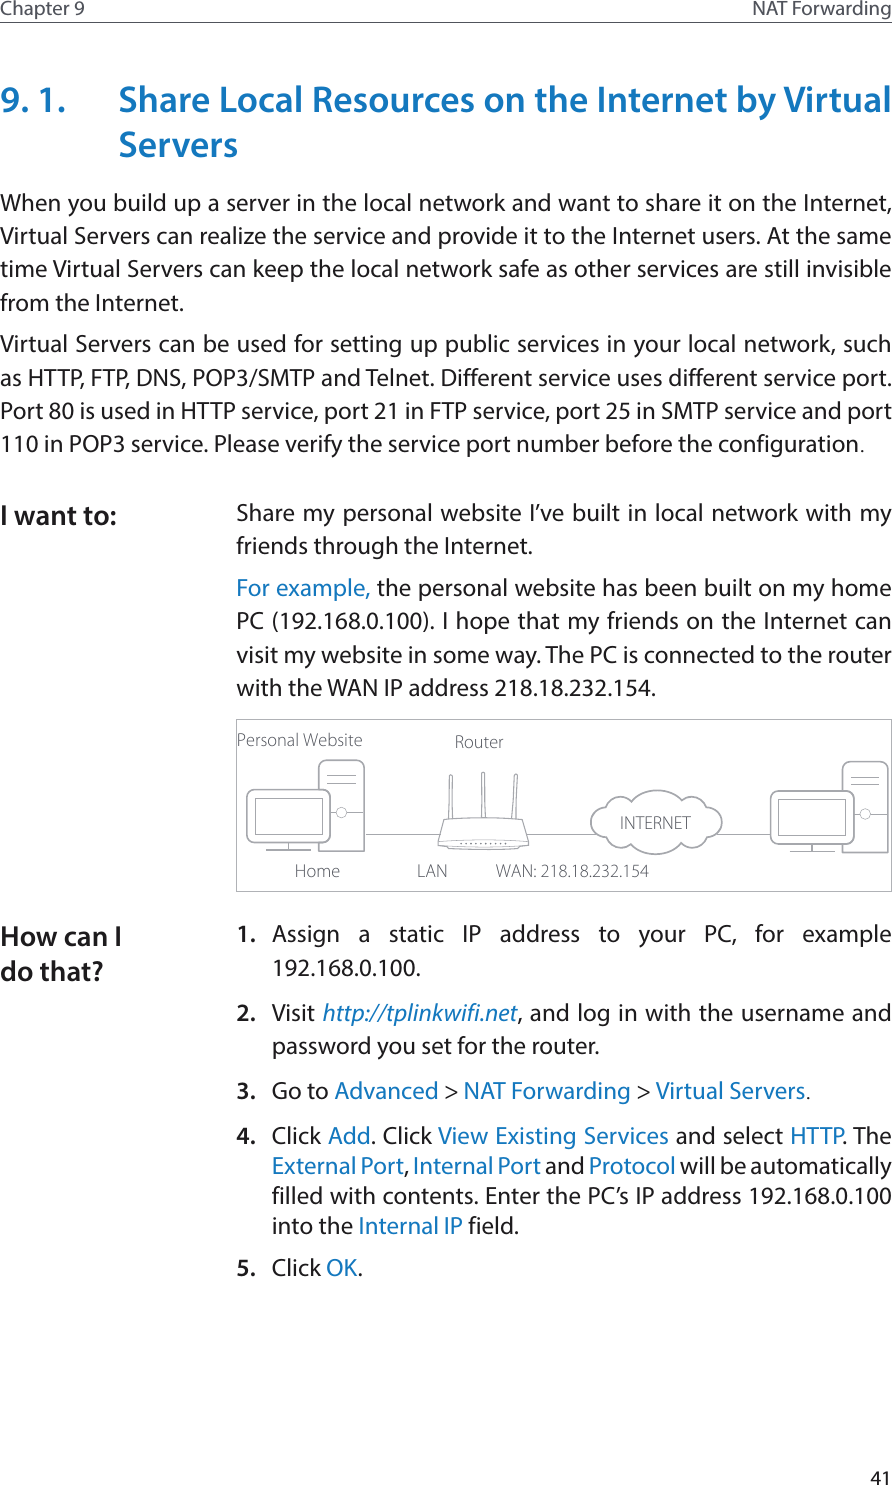 41Chapter 9 NAT Forwarding9. 1.  Share Local Resources on the Internet by Virtual ServersWhen you build up a server in the local network and want to share it on the Internet, Virtual Servers can realize the service and provide it to the Internet users. At the same time Virtual Servers can keep the local network safe as other services are still invisible from the Internet.Virtual Servers can be used for setting up public services in your local network, such as HTTP, FTP, DNS, POP3/SMTP and Telnet. Different service uses different service port. Port 80 is used in HTTP service, port 21 in FTP service, port 25 in SMTP service and port 110 in POP3 service. Please verify the service port number before the configuration.Share my personal website I’ve built in local network with my friends through the Internet.For example, the personal website has been built on my home PC (192.168.0.100). I hope that my friends on the Internet can visit my website in some way. The PC is connected to the router with the WAN IP address 218.18.232.154.Personal WebsiteHomeRouterWAN: 218.18.232.154LAN1.  Assign a static IP address to your PC, for example 192.168.0.100.2.  Visit http://tplinkwifi.net, and log in with the username and password you set for the router.3.  Go to Advanced &gt; NAT Forwarding &gt; Virtual Servers.4.  Click Add. Click View Existing Services and select HTTP. The External Port, Internal Port and Protocol will be automatically filled with contents. Enter the PC’s IP address 192.168.0.100 into the Internal IP field.5.  Click OK.I want to:How can I do that?INTERNET